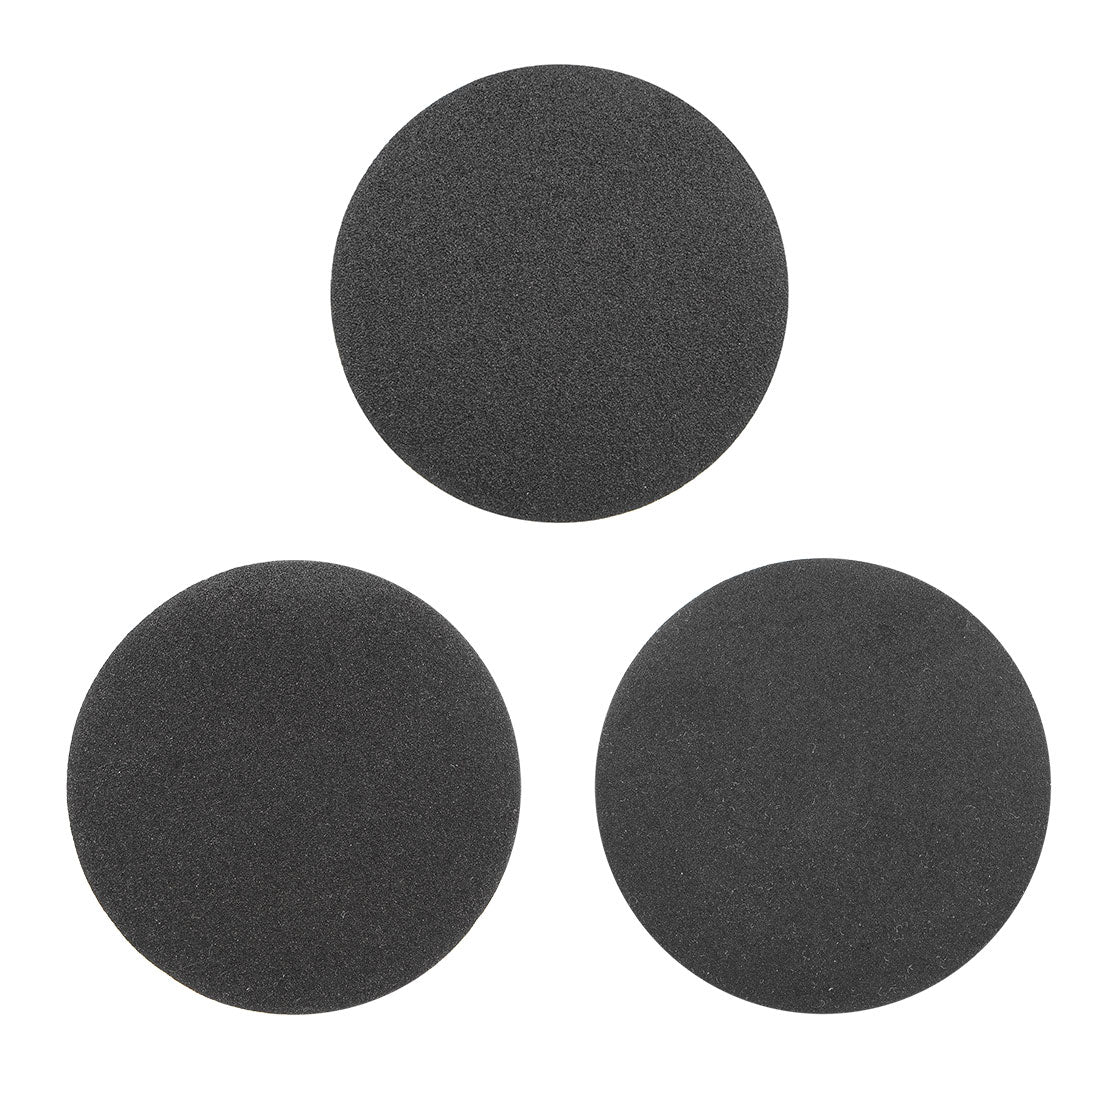 Uxcell Uxcell 6-Inch Hook and Loop Sanding Disc Wet/Dry 150/240/400 Grit Assorted Silicon Carbide Round Sandpaper for Sanding Grinder Polishing 15 Pcs